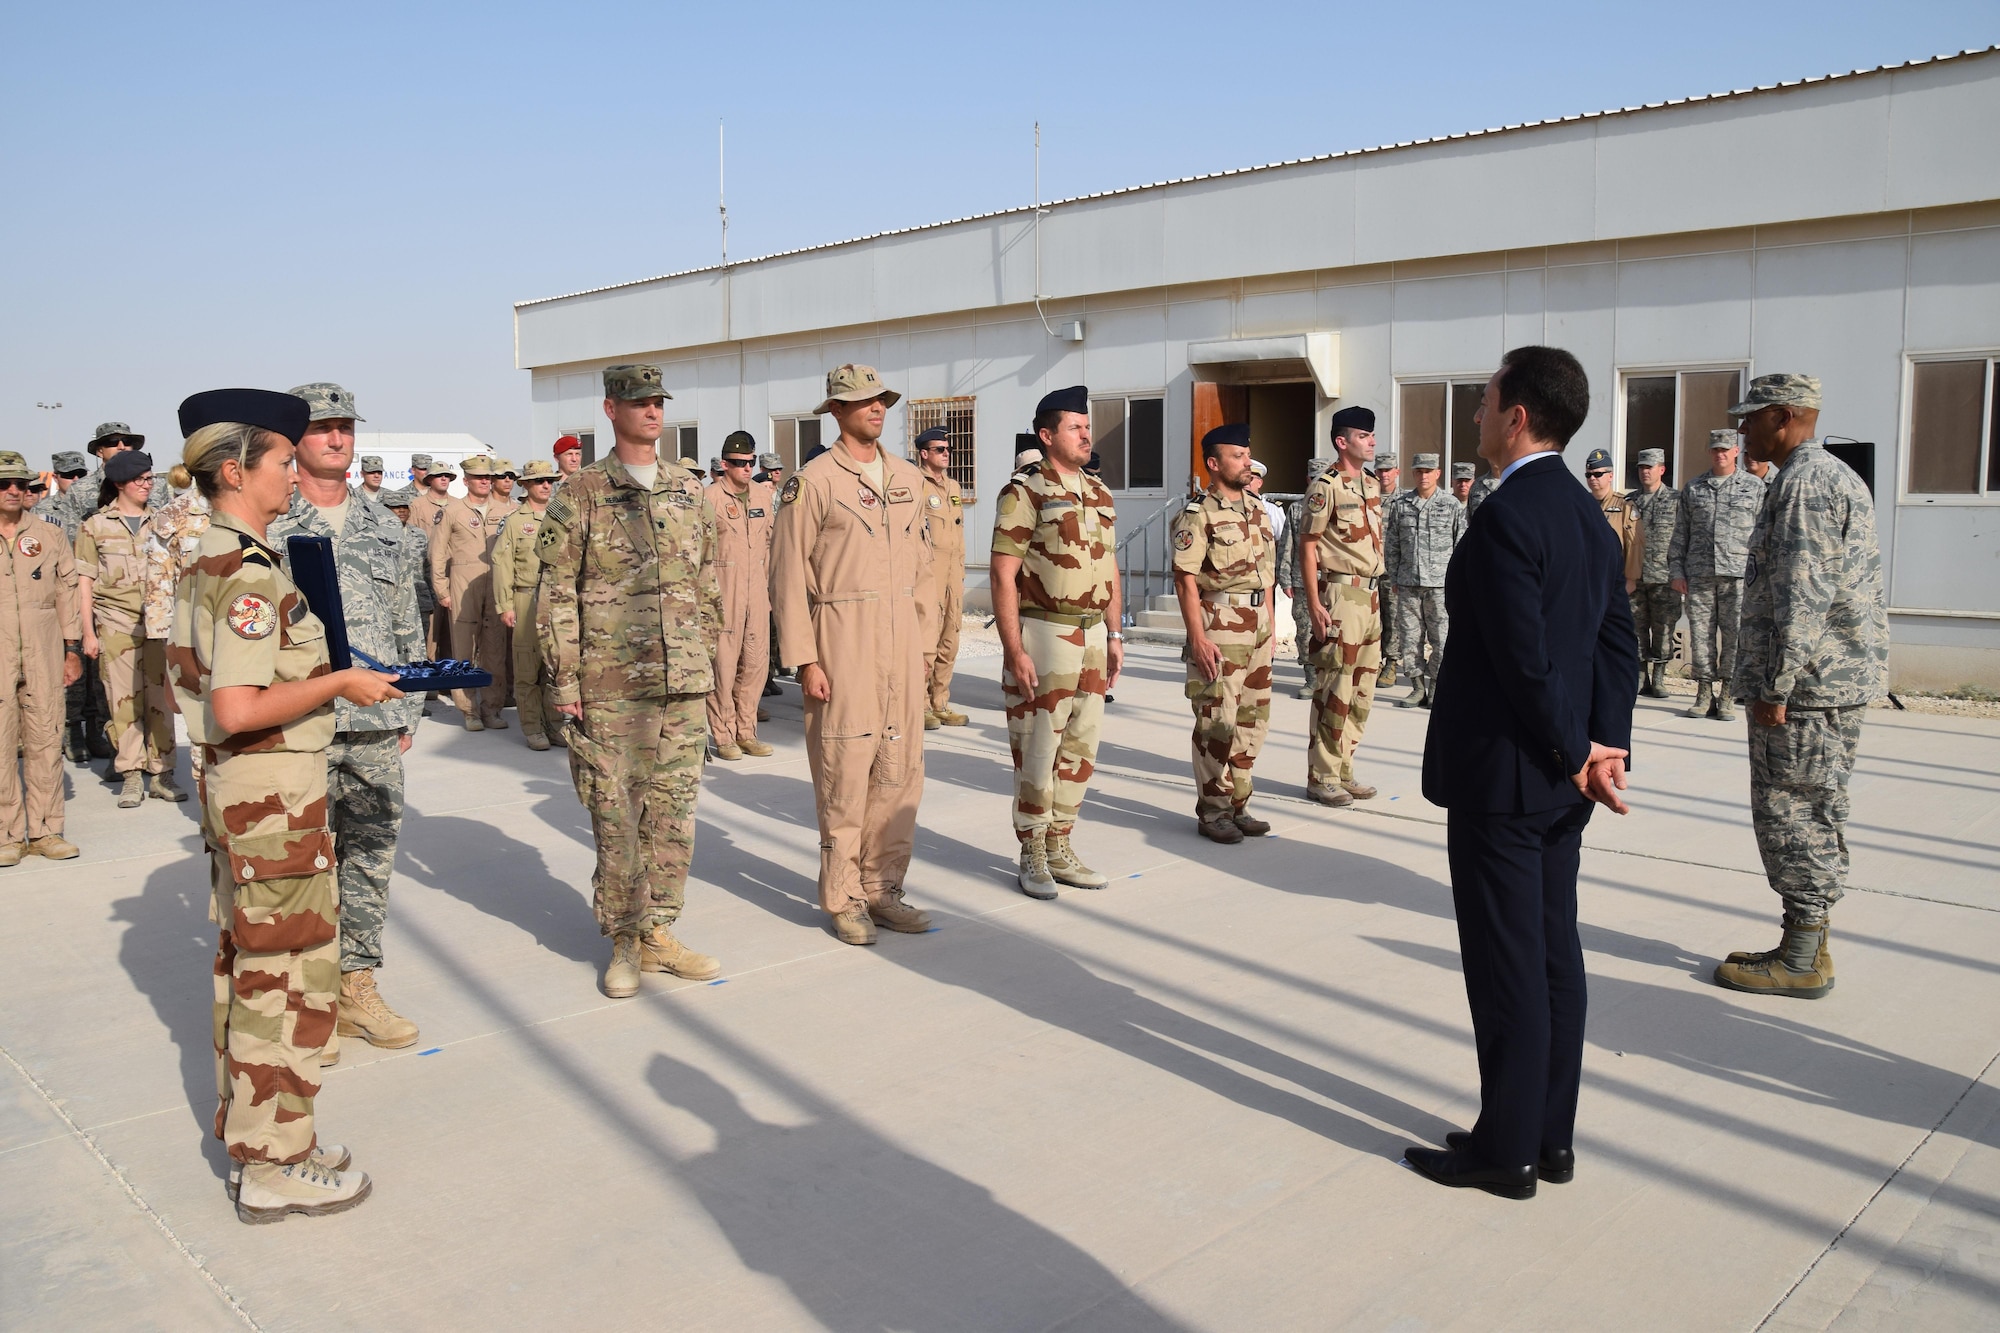 Recipients of the French National Defense Medal and Air Force Achievement Medal form a receiving line during the Bastille Day ceremony July 14, 2016, at Al Udeid Air Base, Qatar. Lt. Gen. Charles Brown, right, U.S. Air Forces Central Command commander, and Monsieur Eric Chevallier, center, Ambassador of France to Qatar, awarded the Air Force Achievement Medal and French National Defense Medal to French and American military members. The members   participated in operational activities to contain, dismantle and destroy Daesh and other terrorist organizations throughout the Southwest Asia region. (U.S. Air Force photo/Technical Sgt. Carlos J. Treviño/Released)